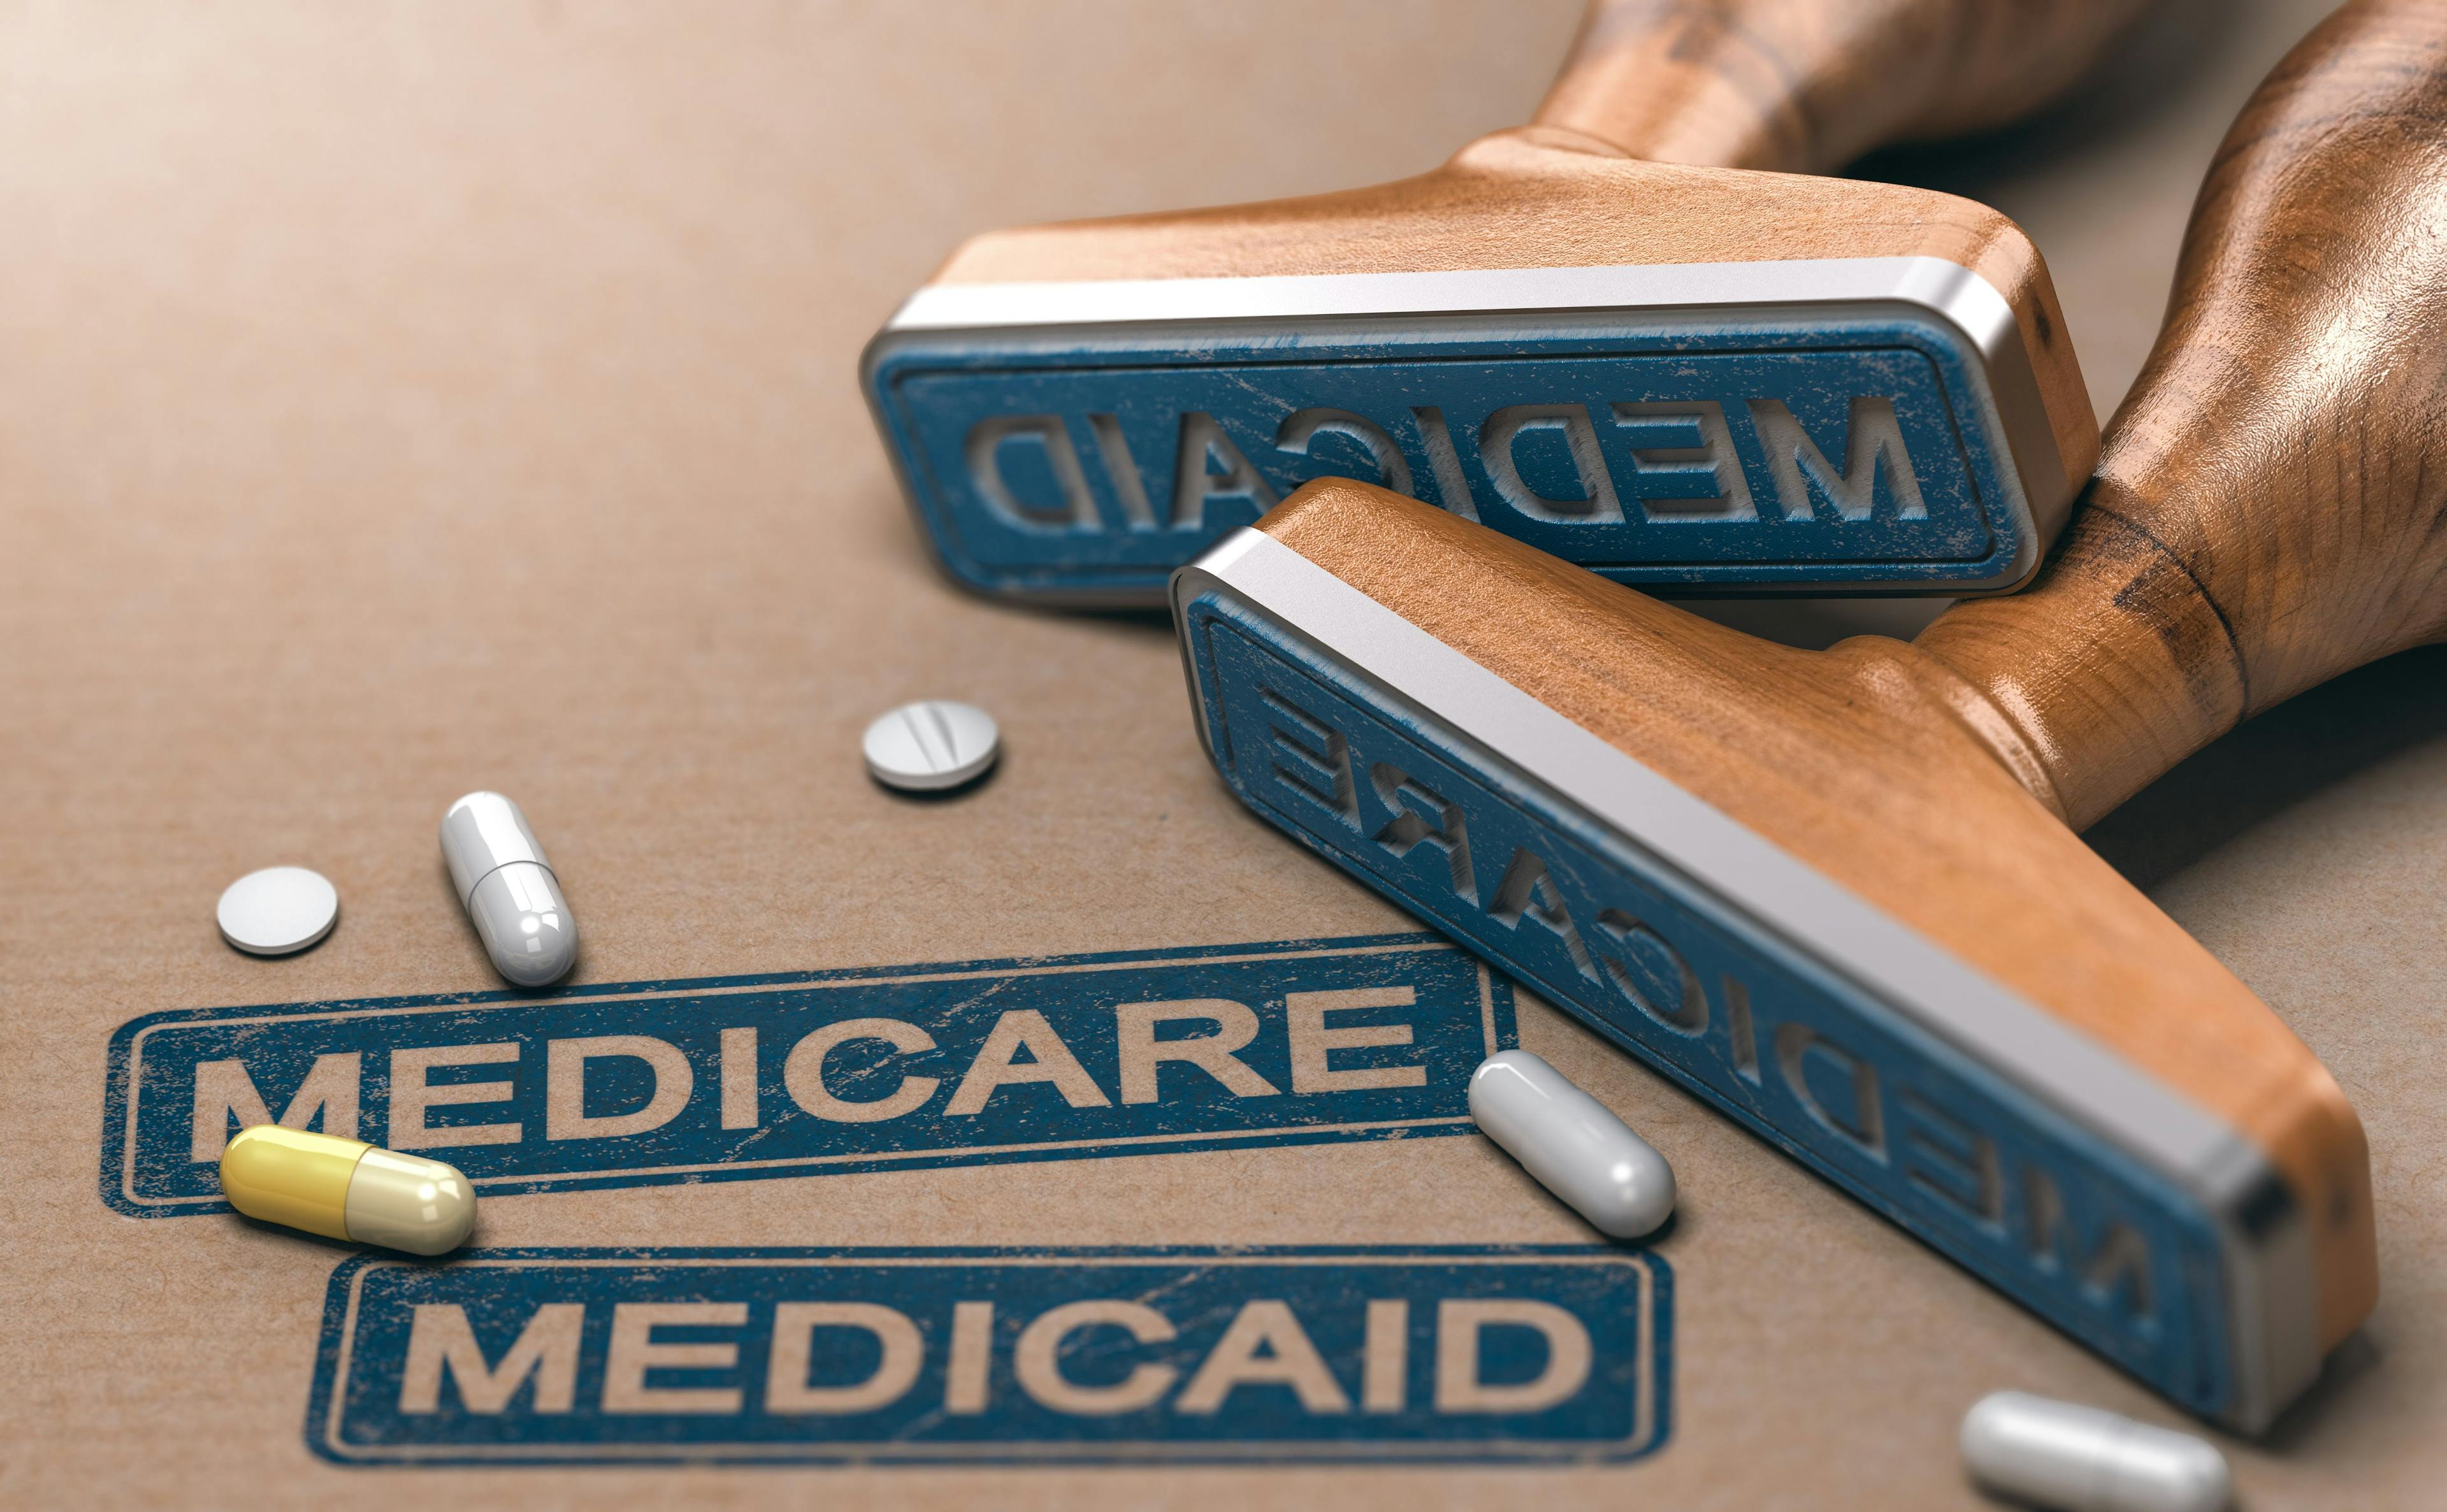 Medicare and Medicaid stamps | Image credit: Olivier Le Moal – stock.adobe.com